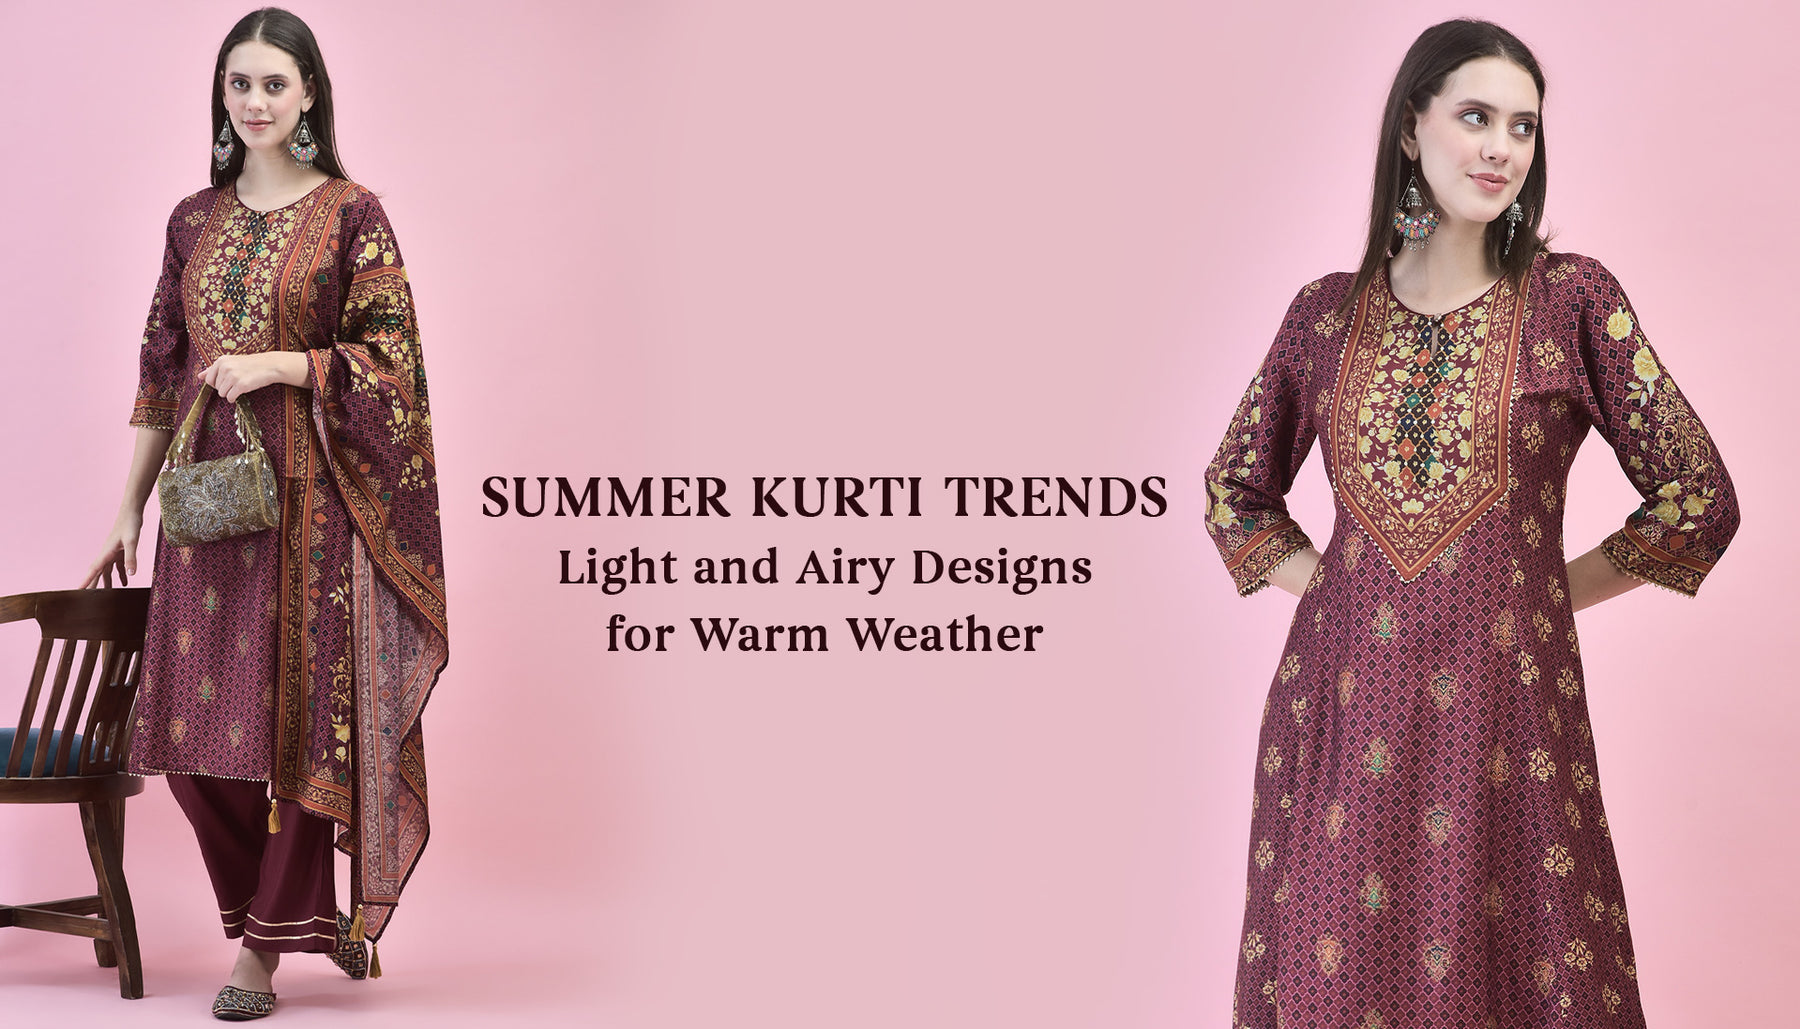 Summer Kurti Trends: Light And Airy Designs For Warm Weather